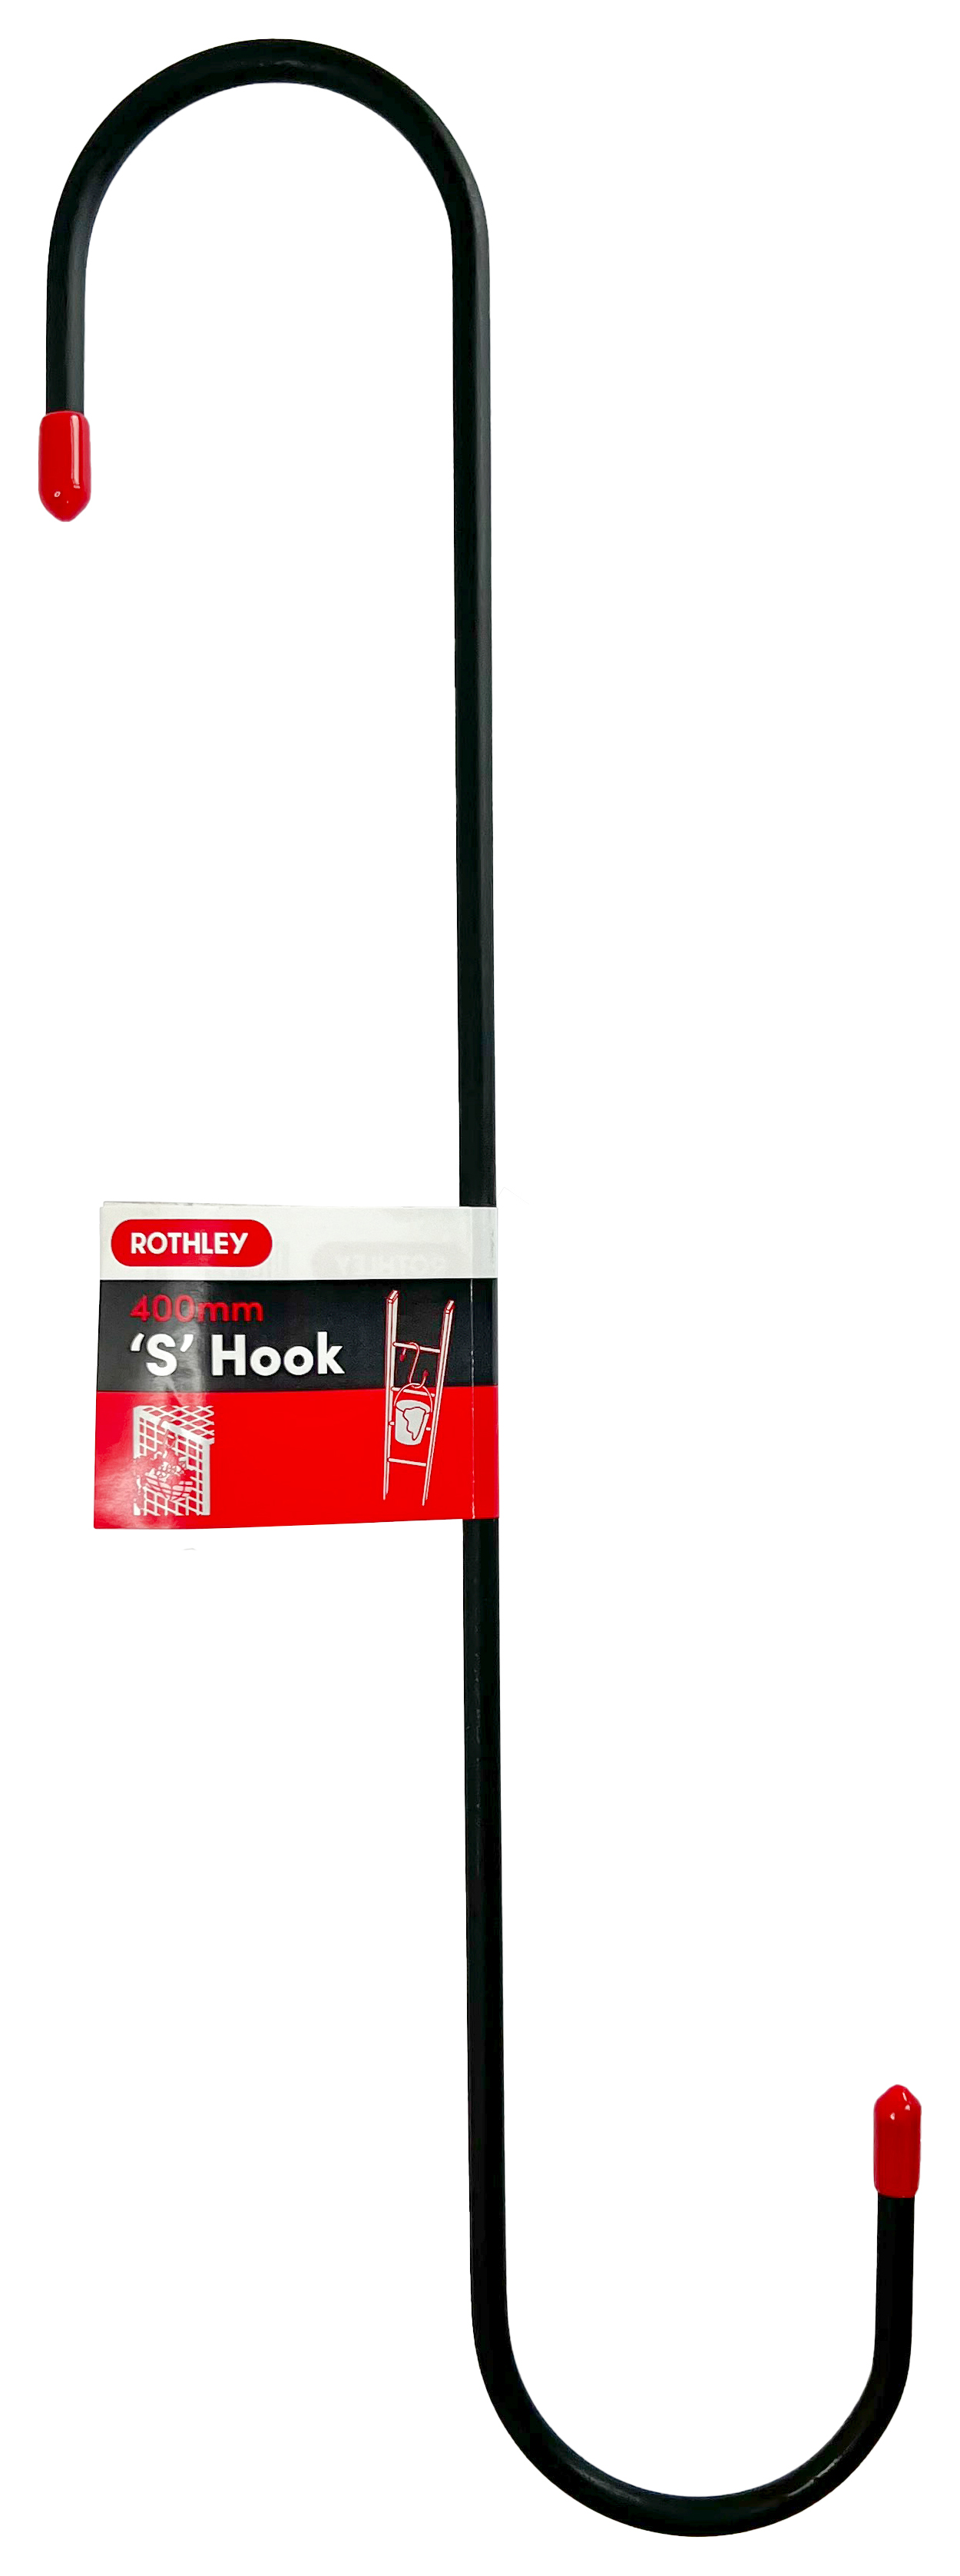 Wickes Hardwall Picture Hooks - 30mm - Pack of 10